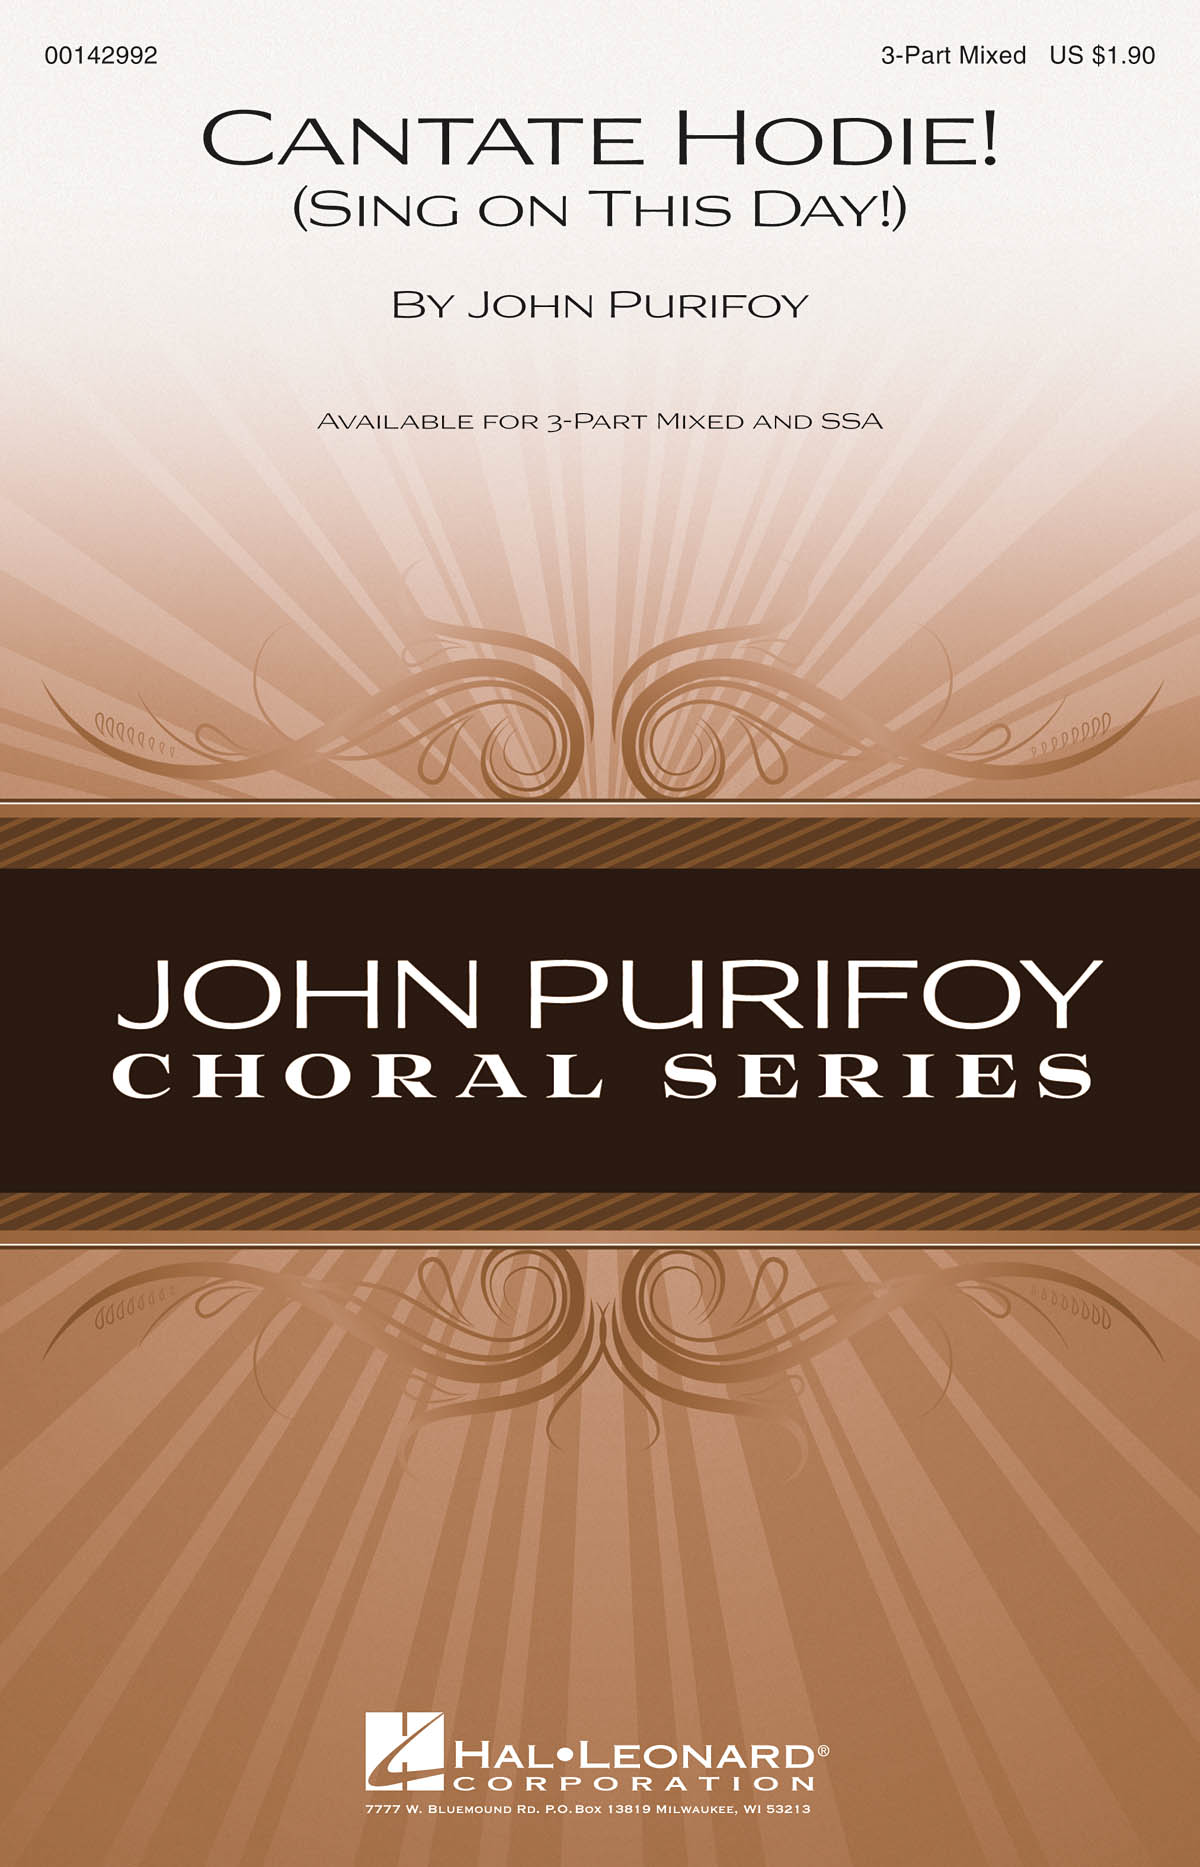 John Purifoy: Cantate Hodie! (Sing on This Day!): Mixed Choir a Cappella: Vocal